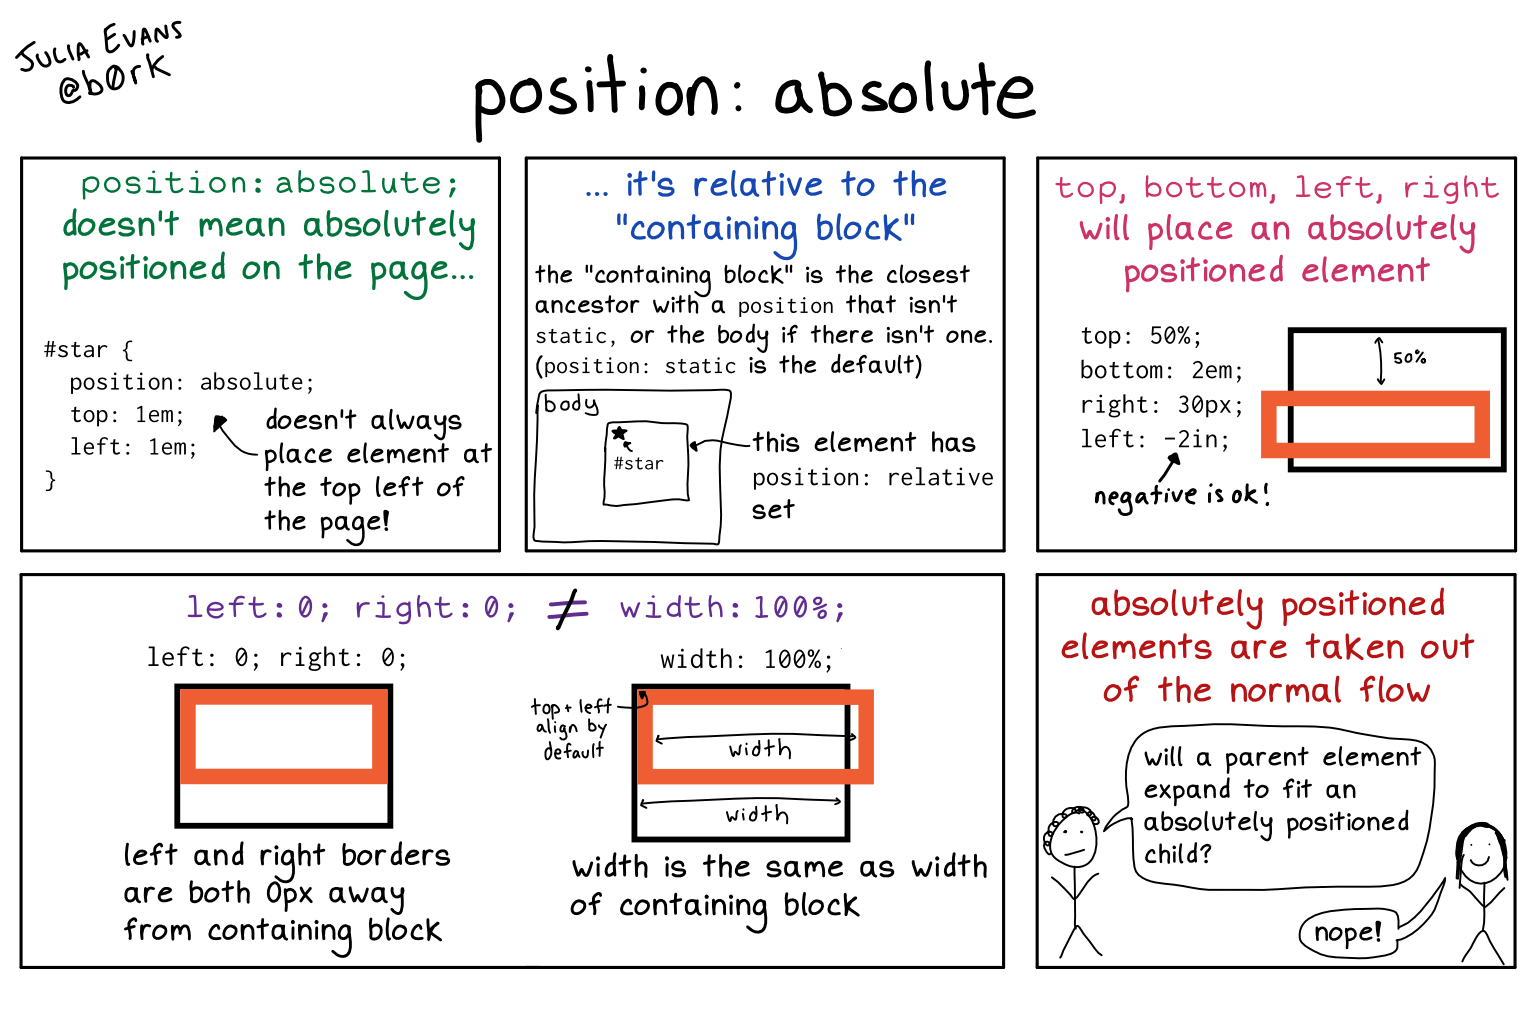 Position absolute bottom